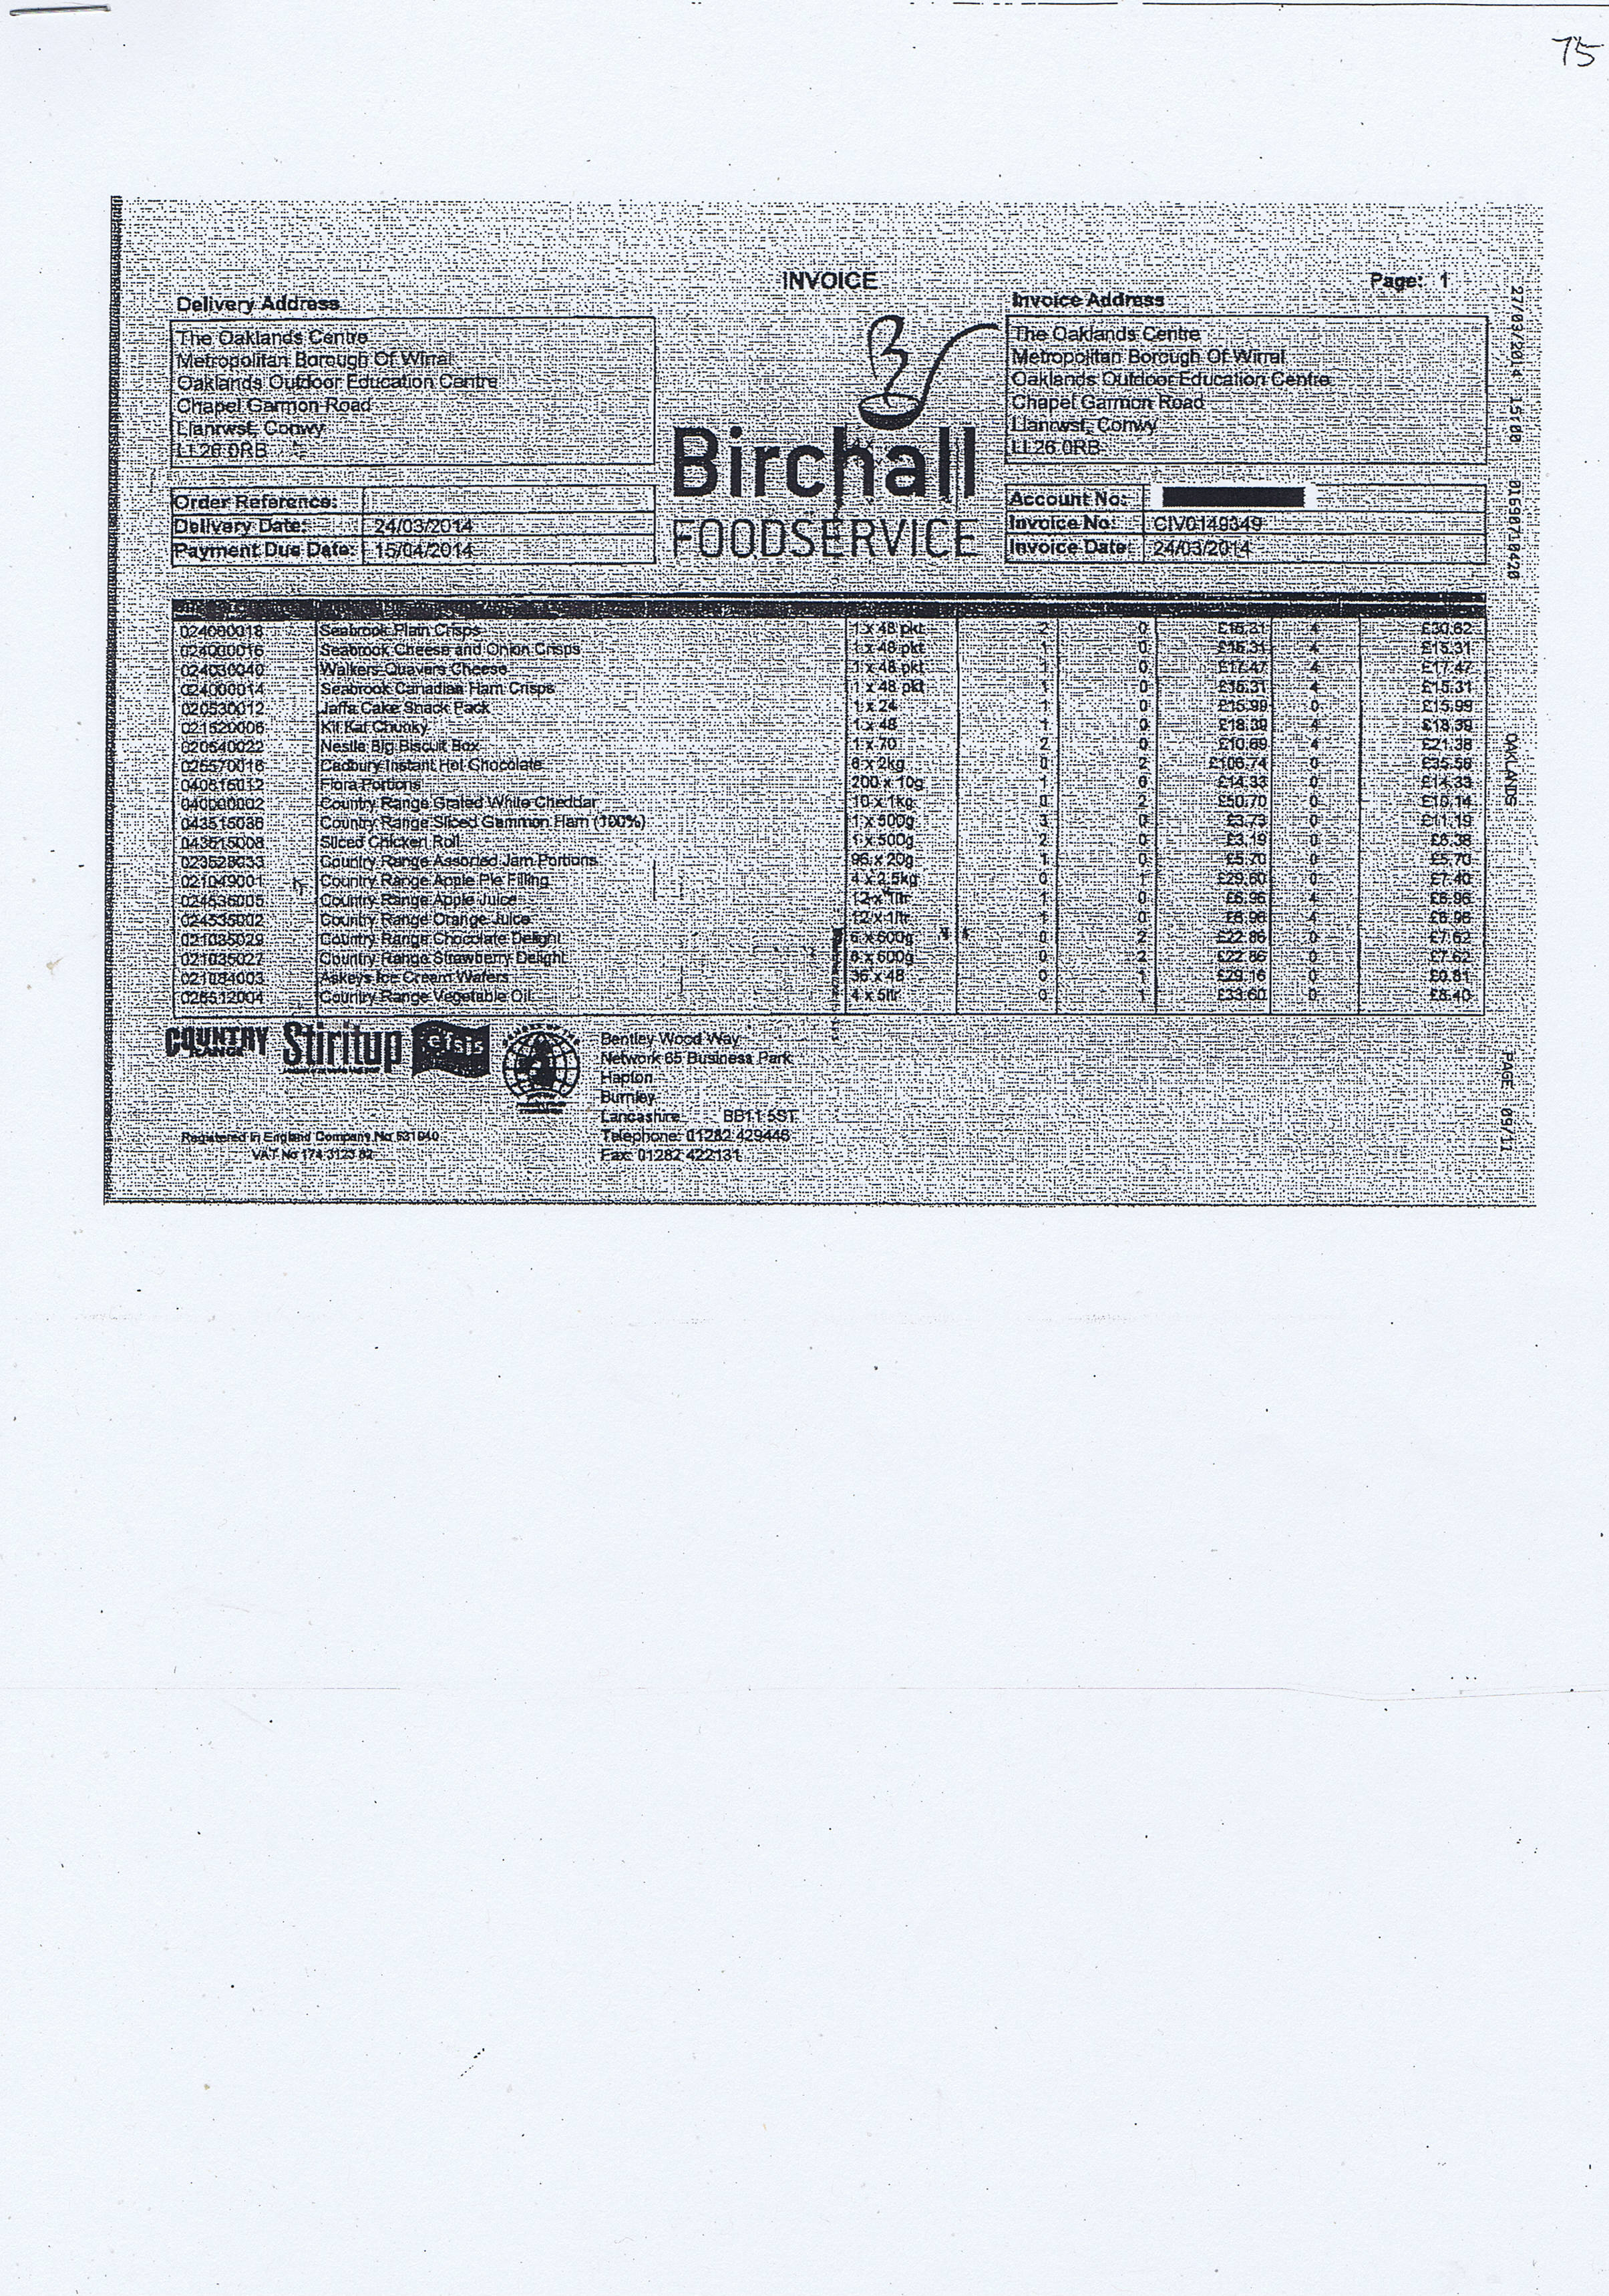 Wirral Council invoice 75 Birchall Foodservice £568.94 page 1 of 3